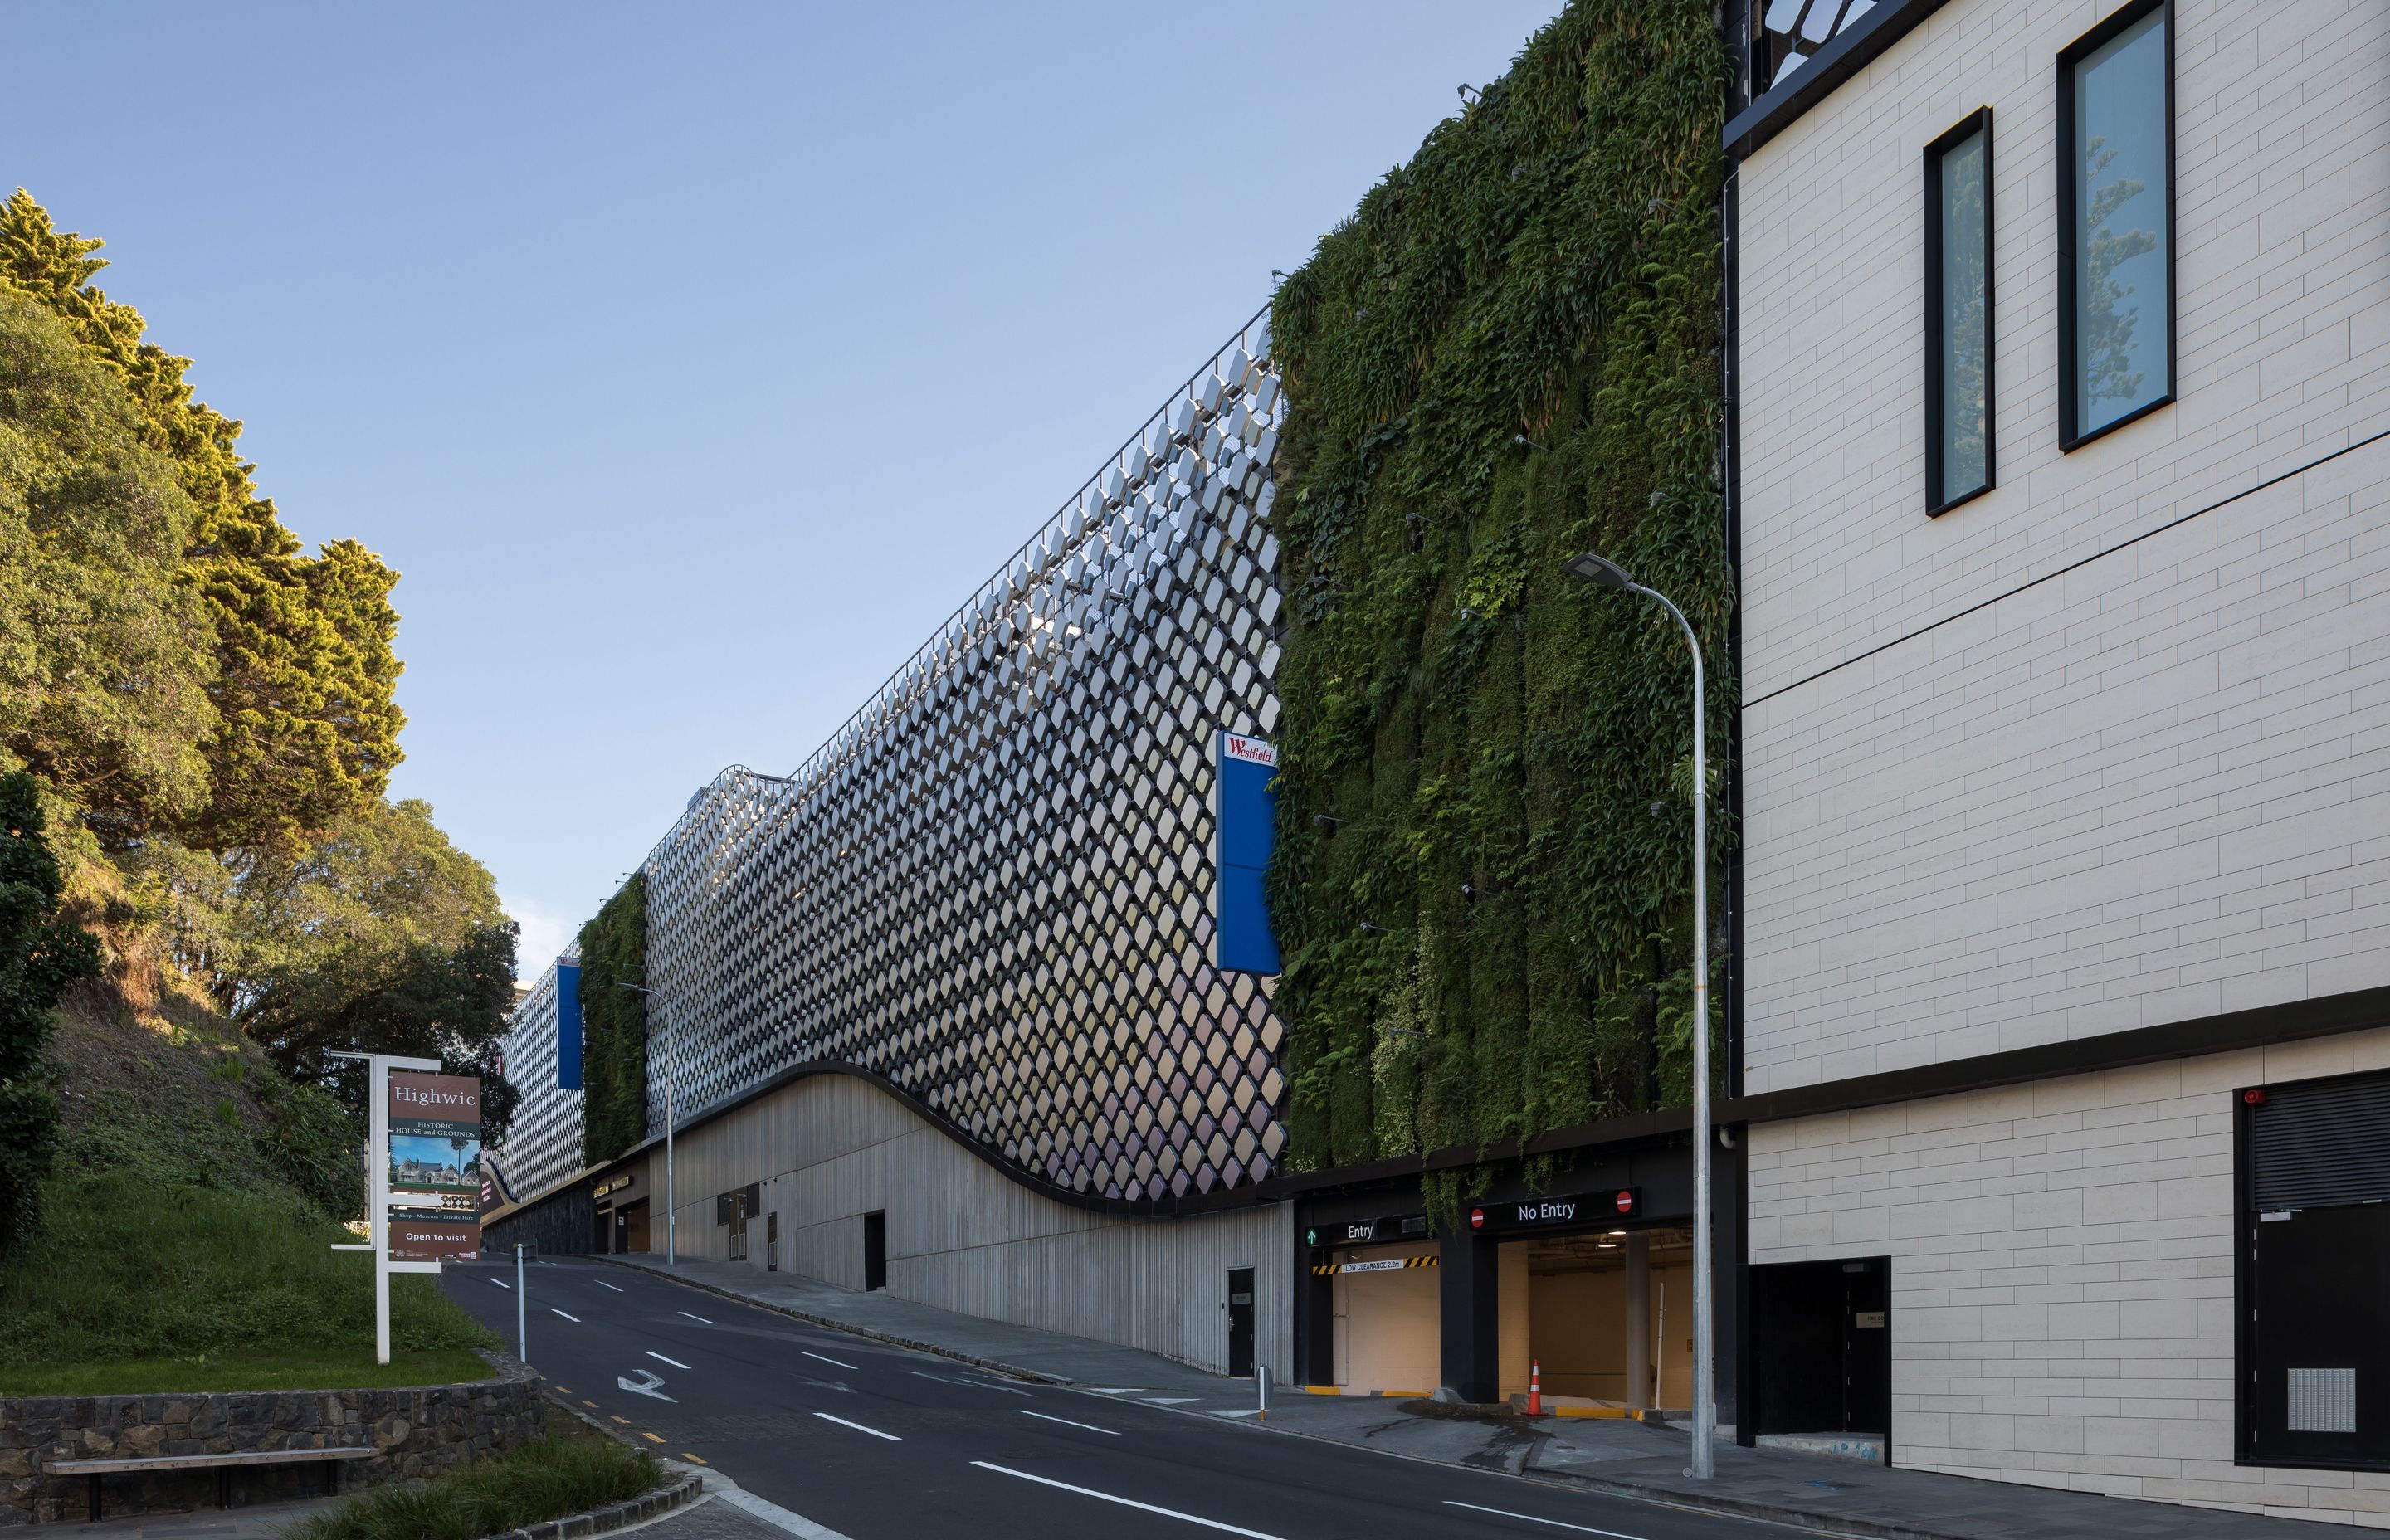 As part of Scentre Group's plan to create a 'living mall' lifestyle destination, Natural Habitats installed the largest total area of green wall technology in Australasia at Westfield Newmarket.